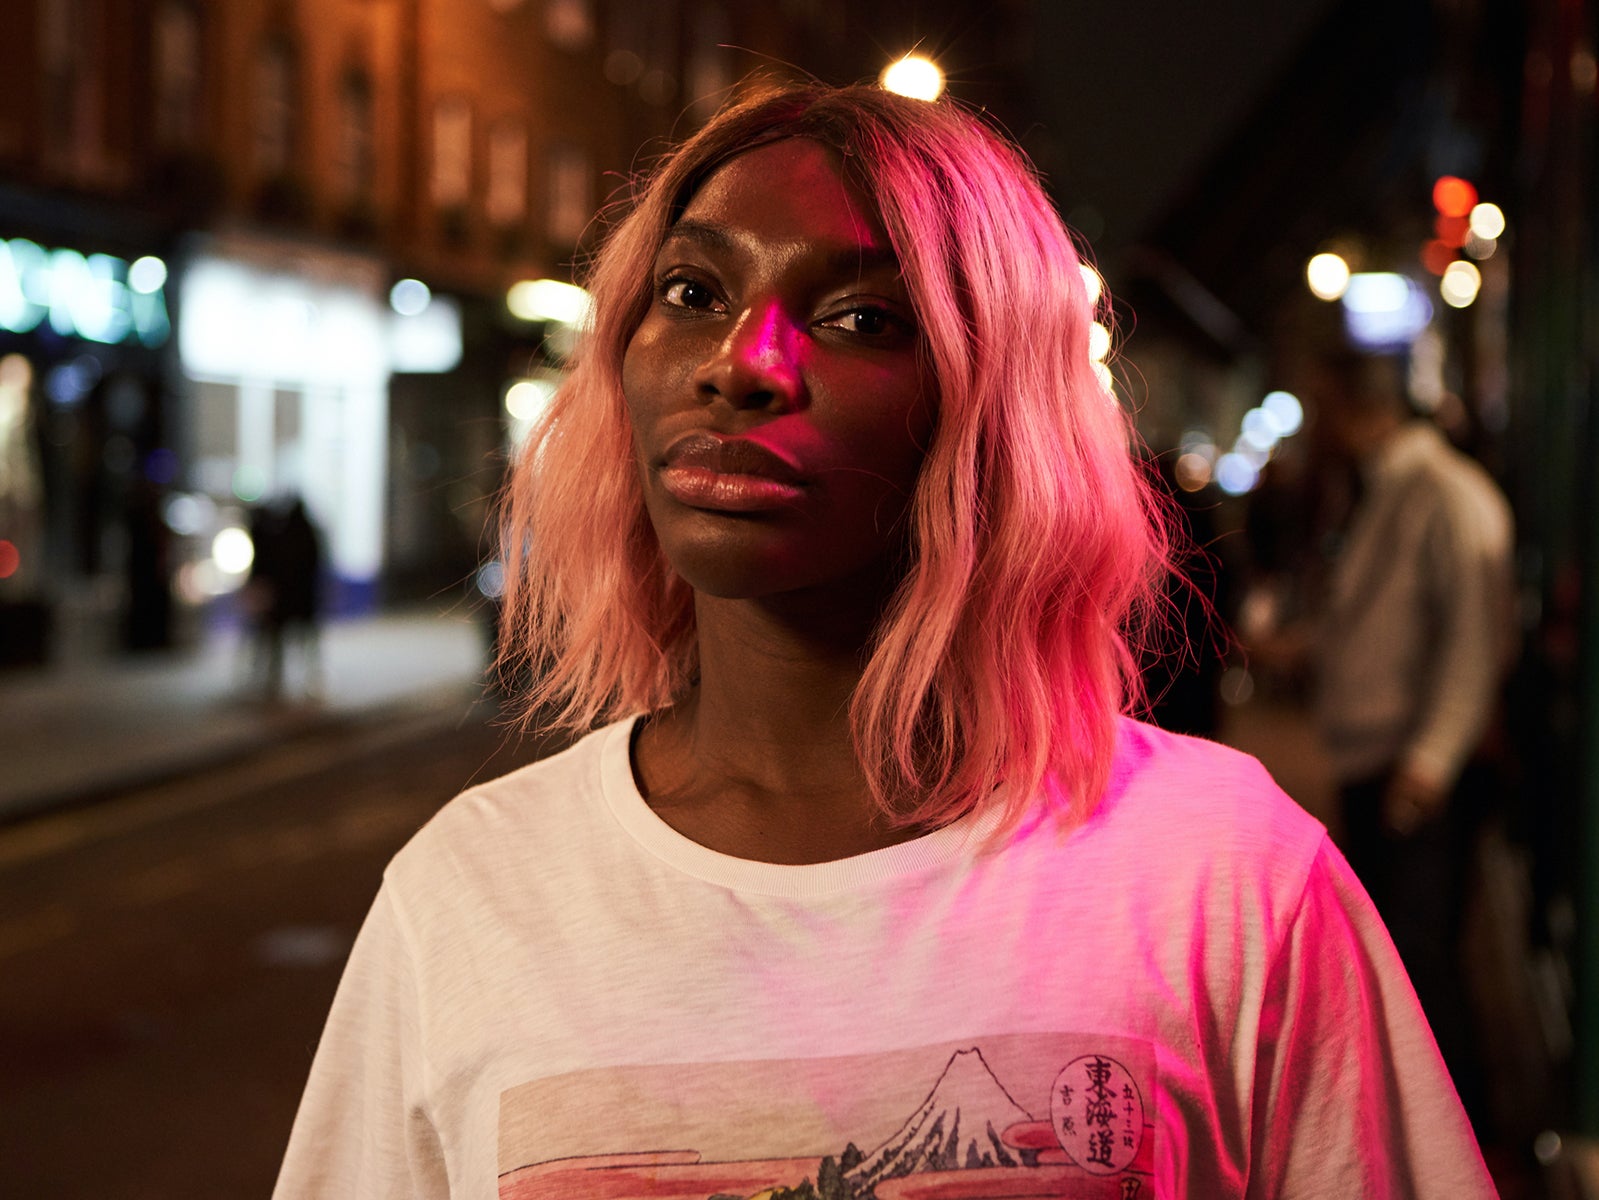 The protagonist in 'I May Destroy You' – a young author named Arabella, played by Michaela Coel – slowly unravels after experiencing flashbacks of a violent sexual assault